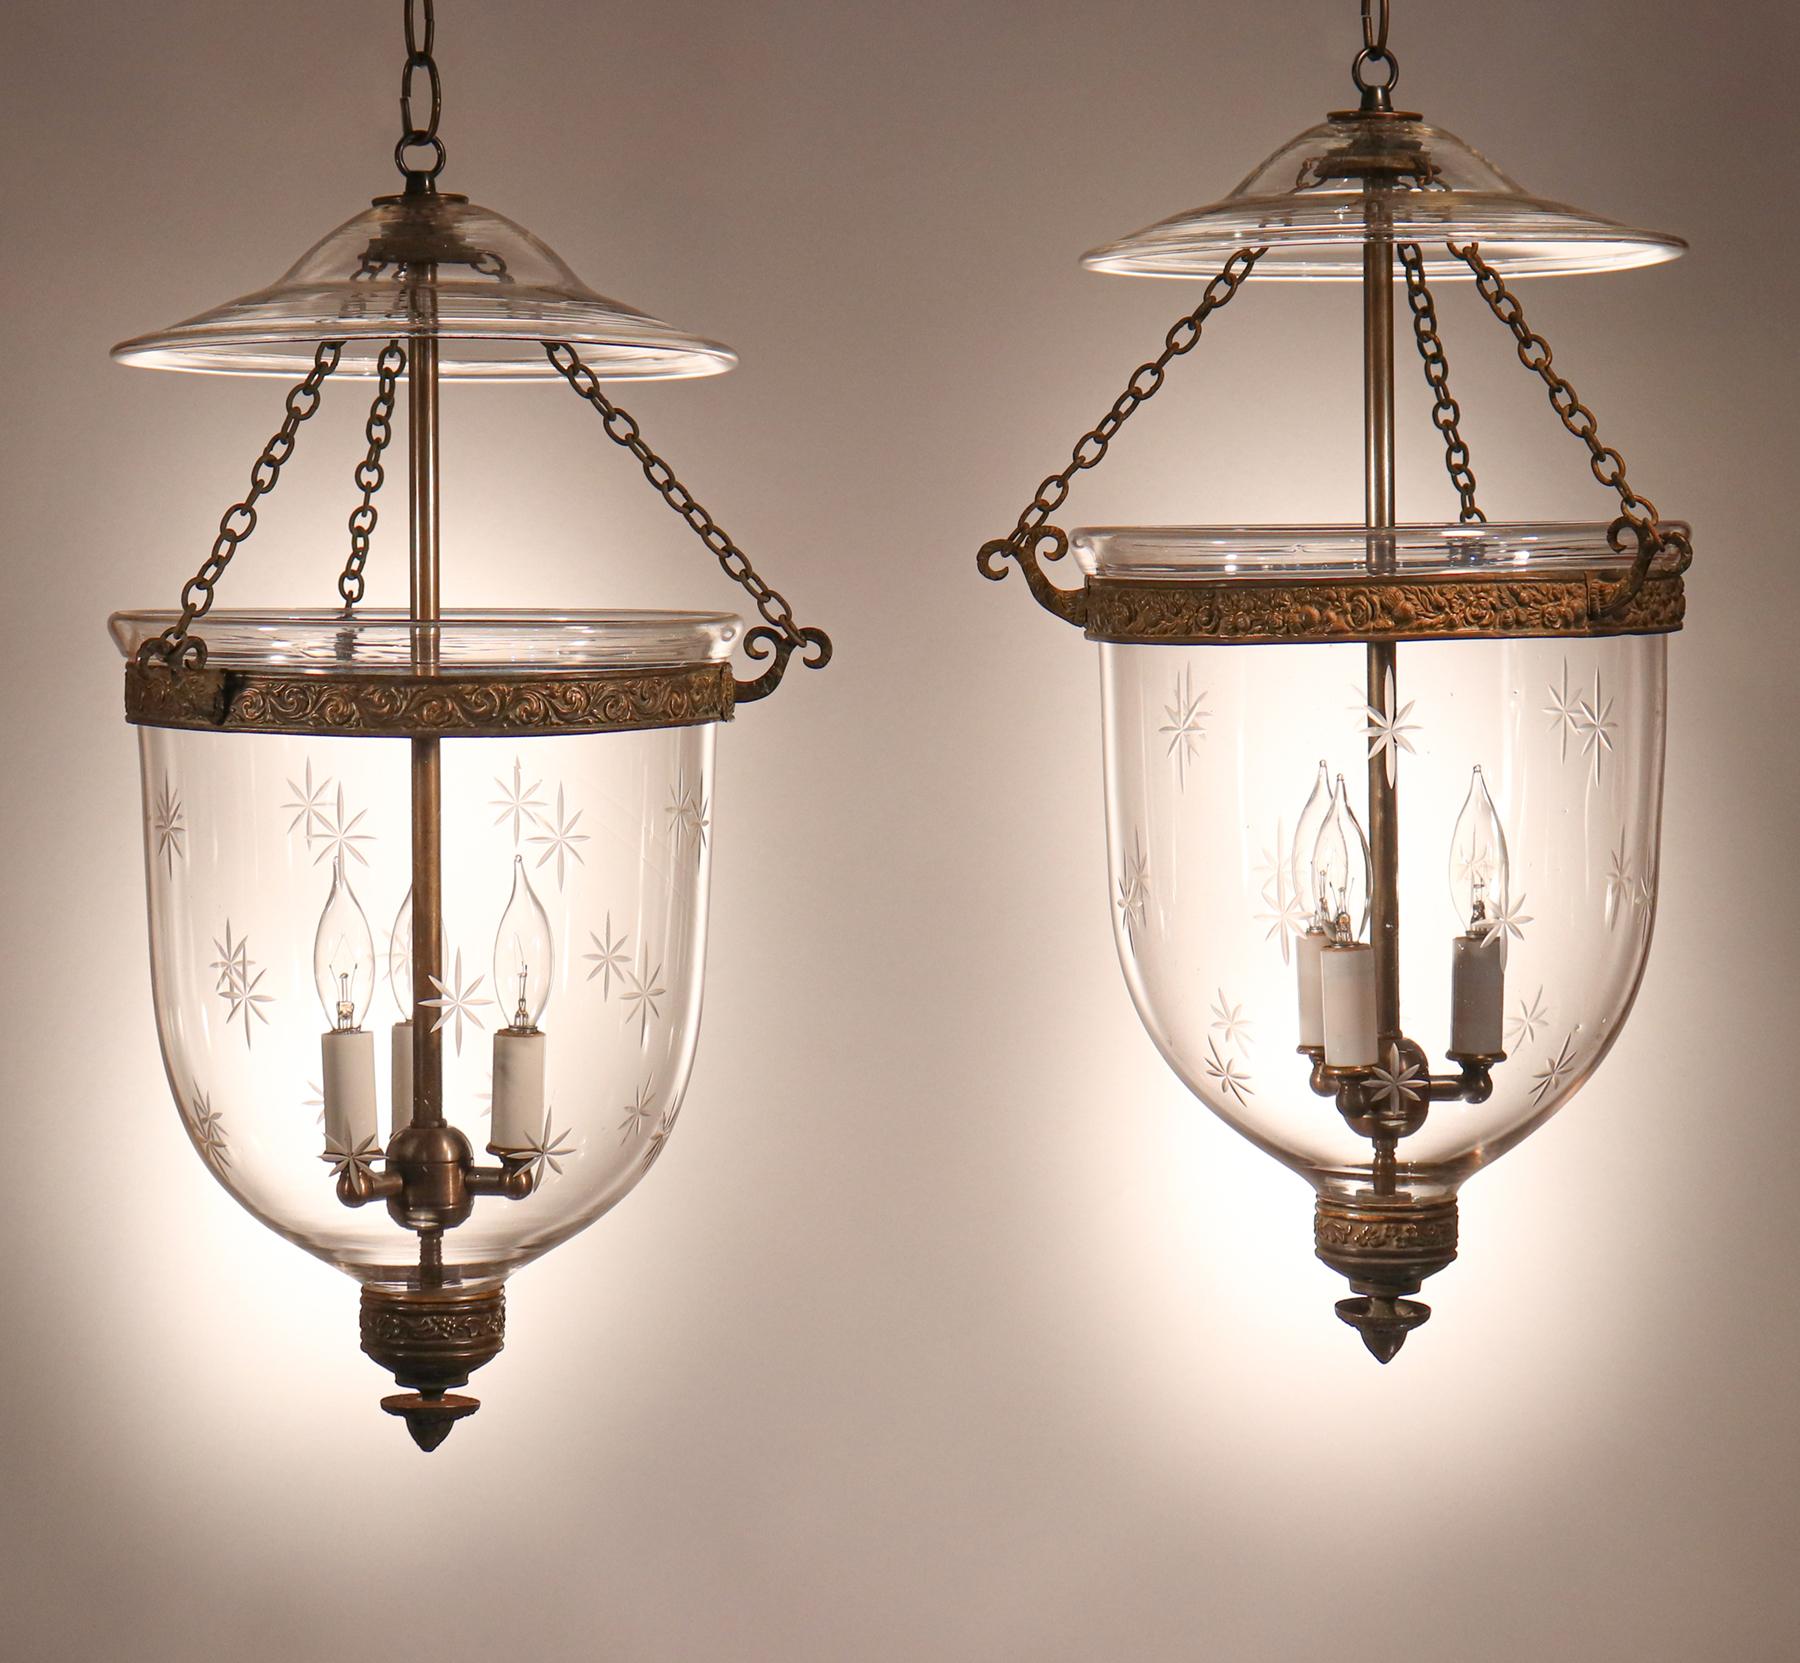 A lovely pair of antique, hand blown glass bell jar lanterns with an etched star motif from England. This well-matched pair of circa 1850 pendants features authentic period brass bands and matching finial/candleholder bases. An exceptional and rare